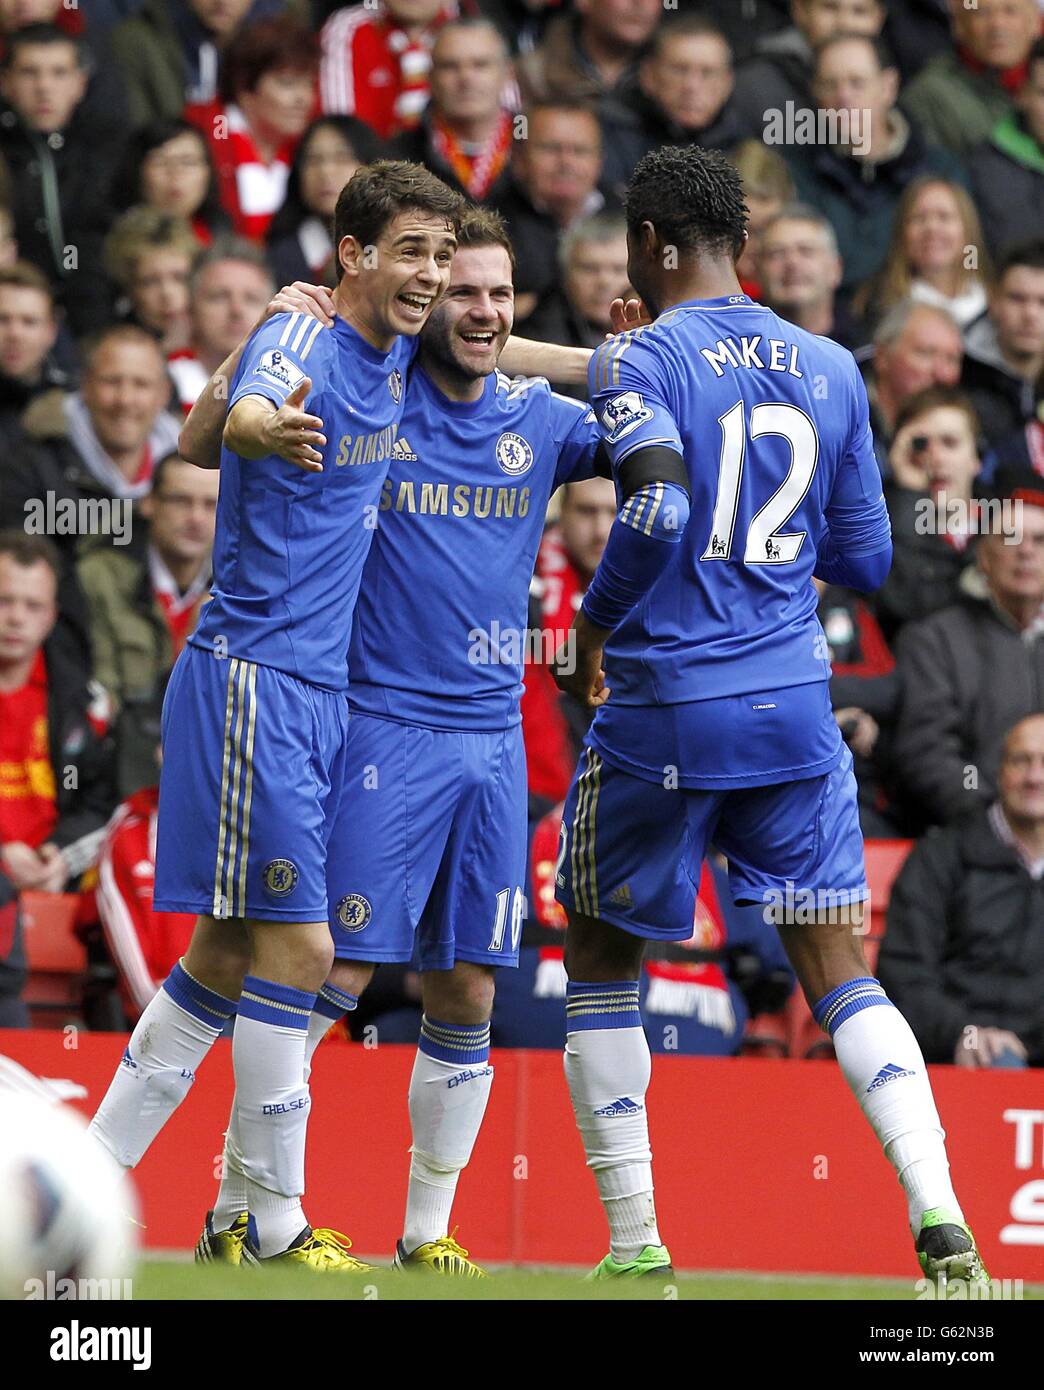 Chelsea's Oscar (left) celebrates scoring his teams first goal of the game with teammates Juan Mata (centre) and Mikel (right) Stock Photo